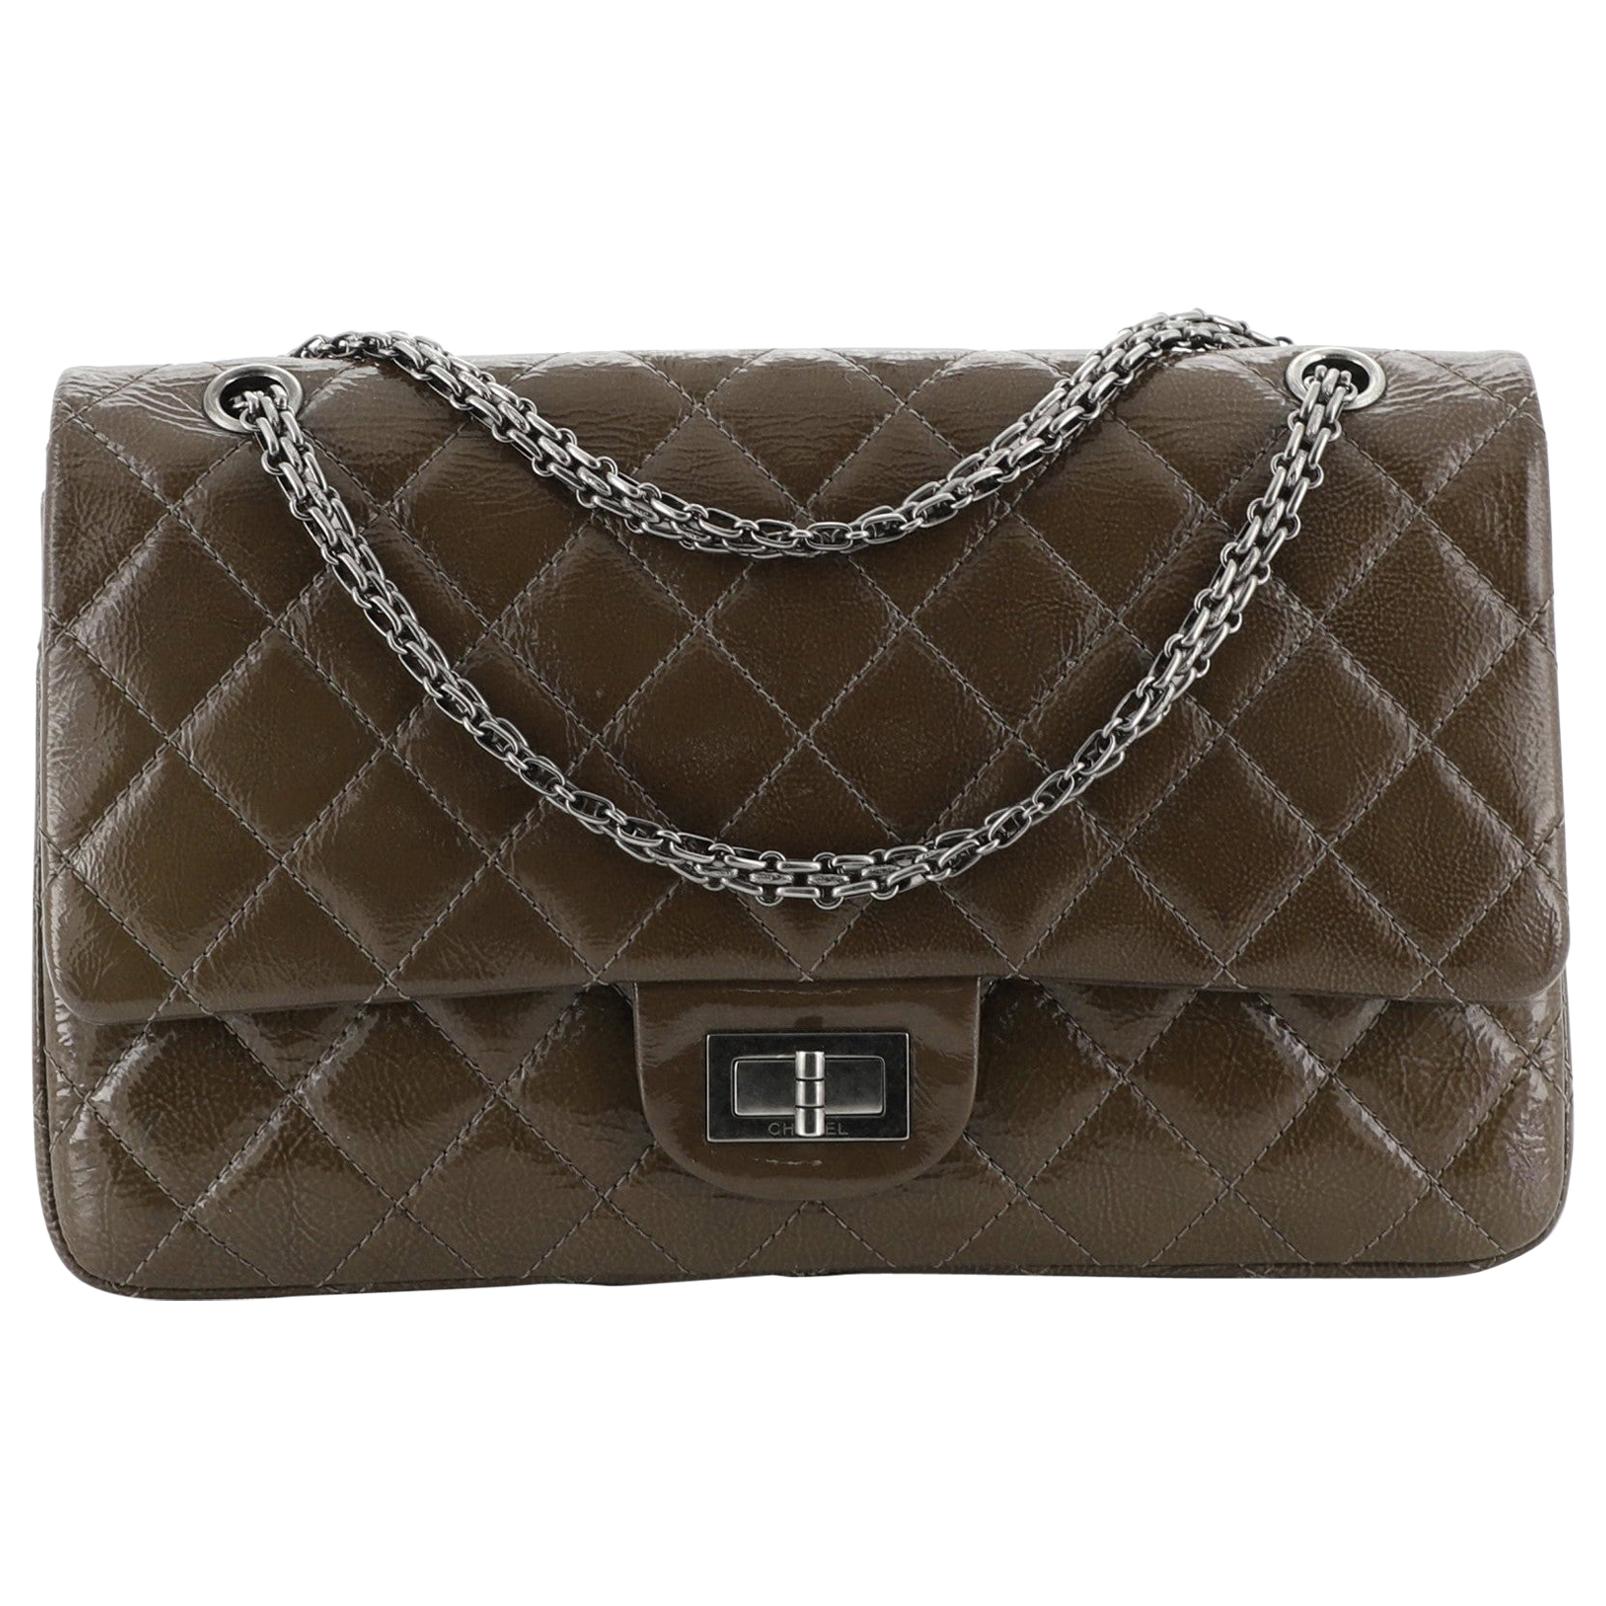 Reissue 2.55 Flap Bag Quilted Patent 227